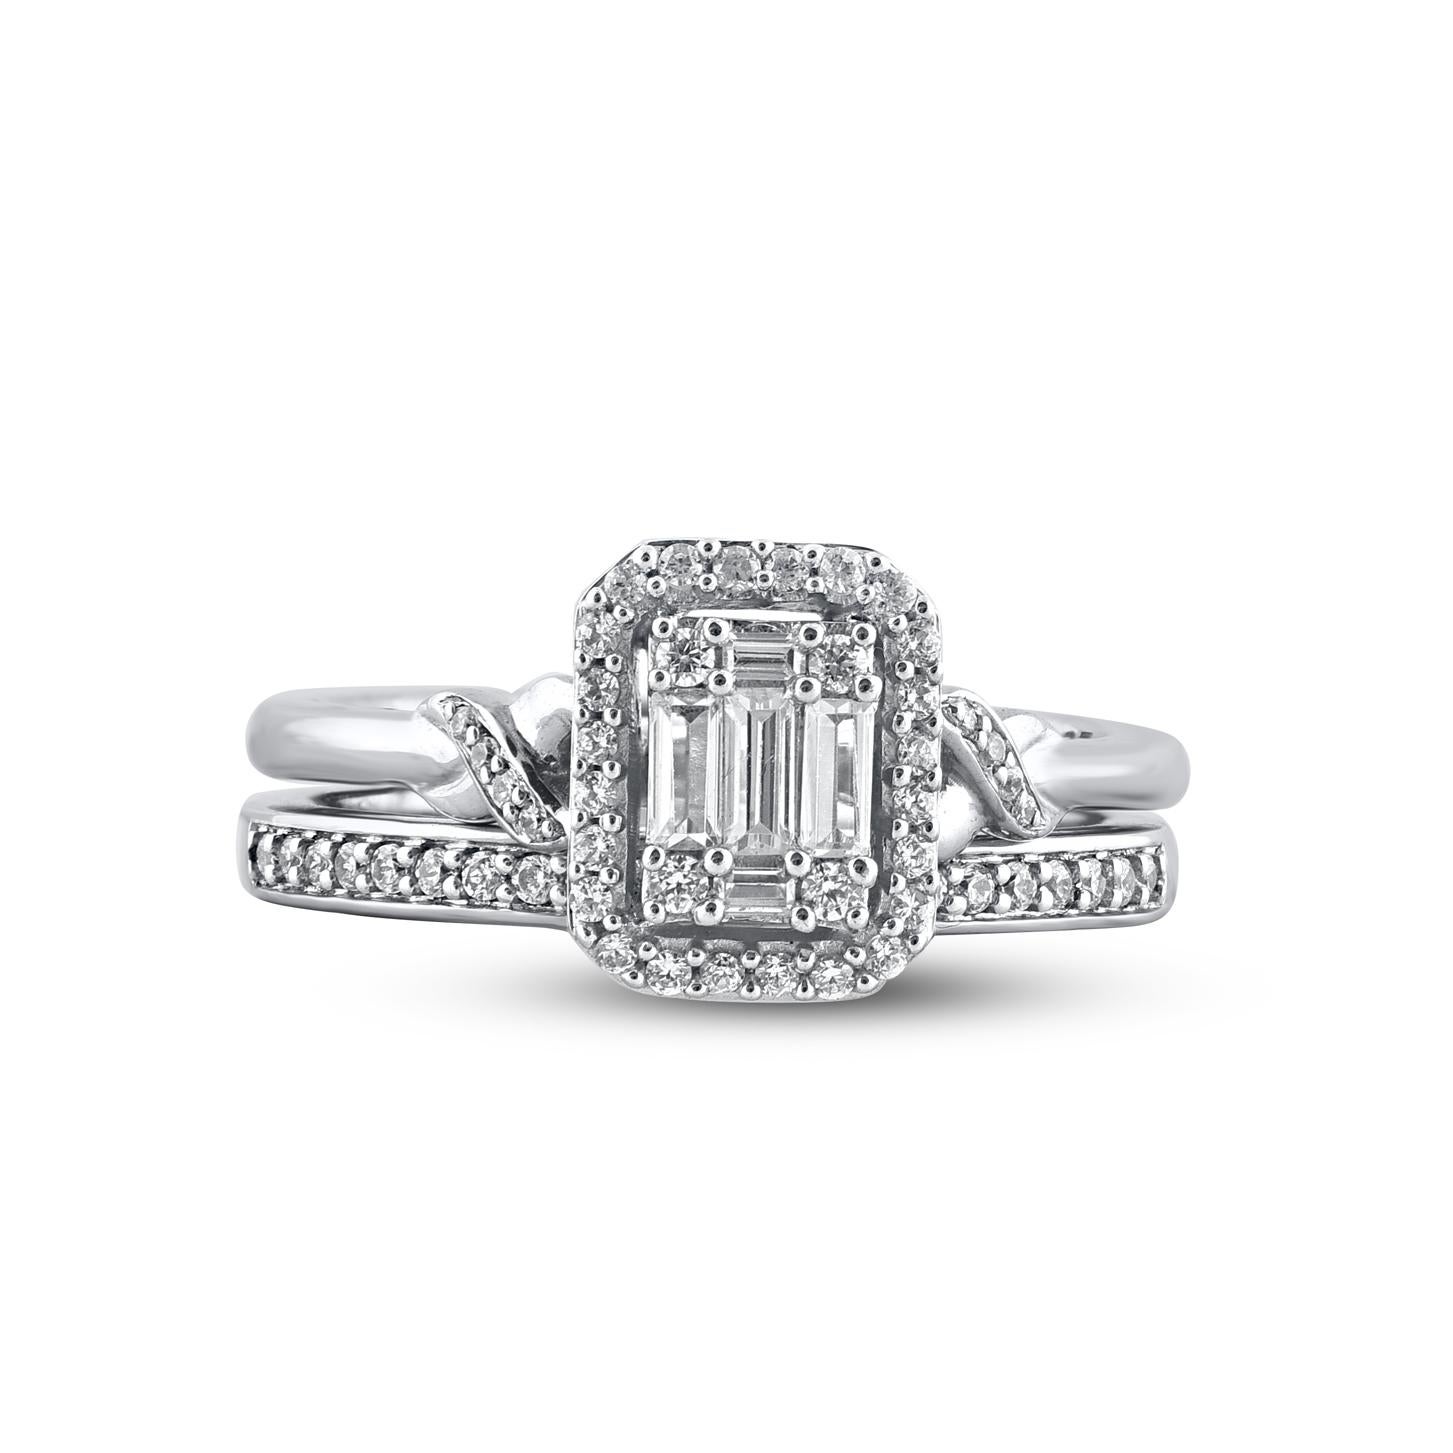 Give her a sophisticated reminder of your love with this diamond ring set. Crafted in 14 Karat white gold. This wedding ring features a sparkling 62 brilliant cut, single cut round diamonds and baguette cut diamonds beautifully set in prong and pave